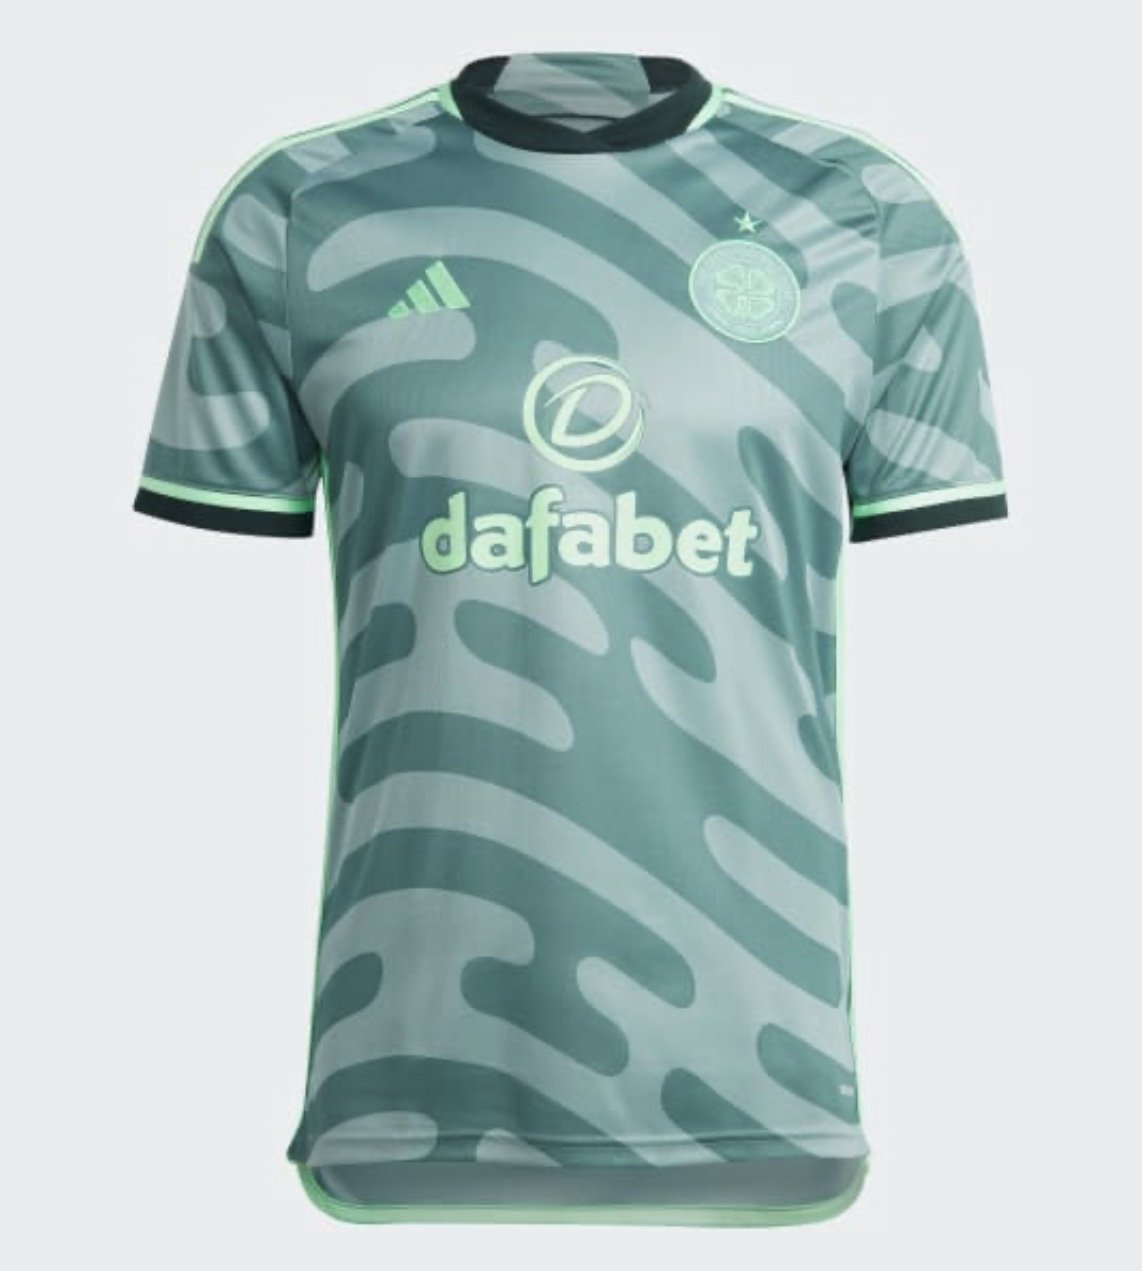 Adidas 20-21 Away Kit Next? Celtic Did Never Wear Their New